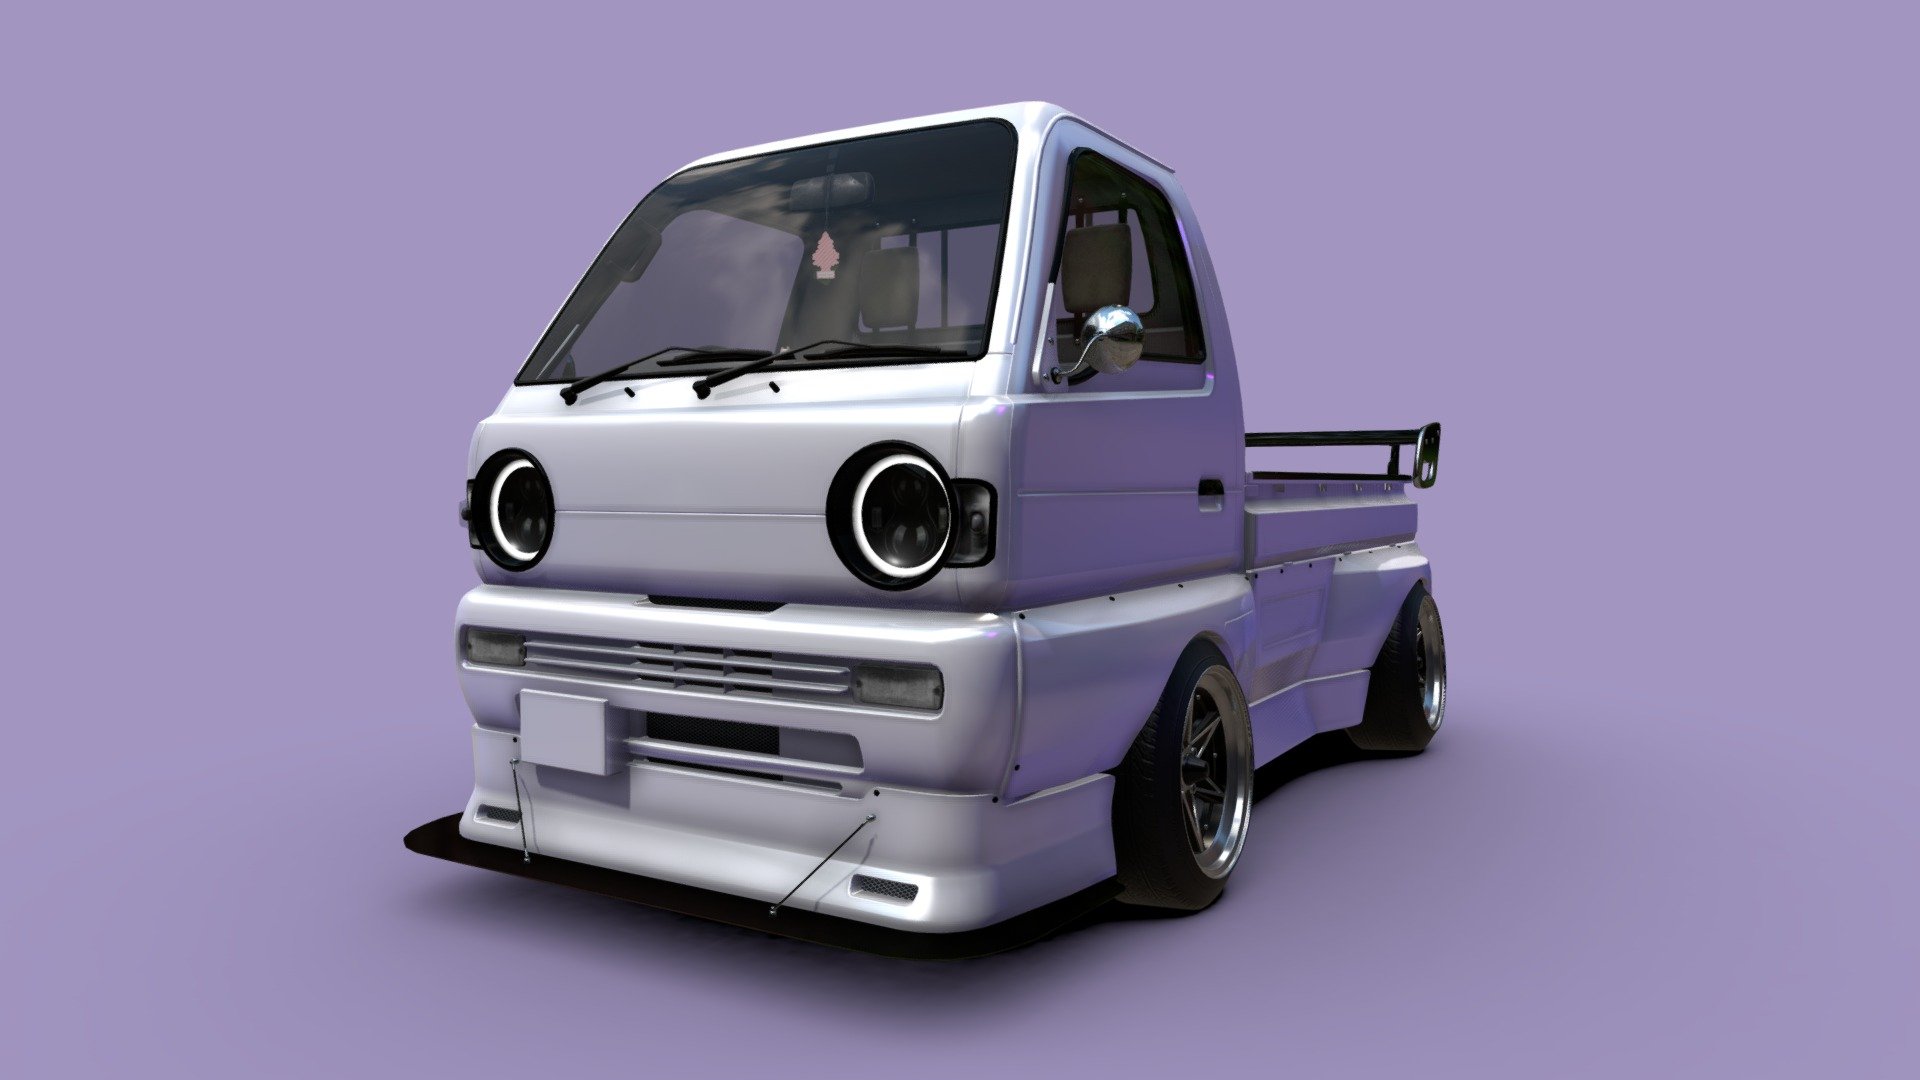 In Japan, there are drifters who prefer to send farm trucks into a skid. It turns out not bad, and there are already enough fans of this drift direction.
Stance Body Kit inspired by the Hoonigan and PANDEM project based on the Suzuki Carry Truck with visualized interior!
Anyway, i hope you will like it 



Wheels Hello Special 86

Made for mobile game

Made in Blender 2.93 textured in Substance Painter - Suzuki Carry - 3D model by Sobakef (@horron) 3d model